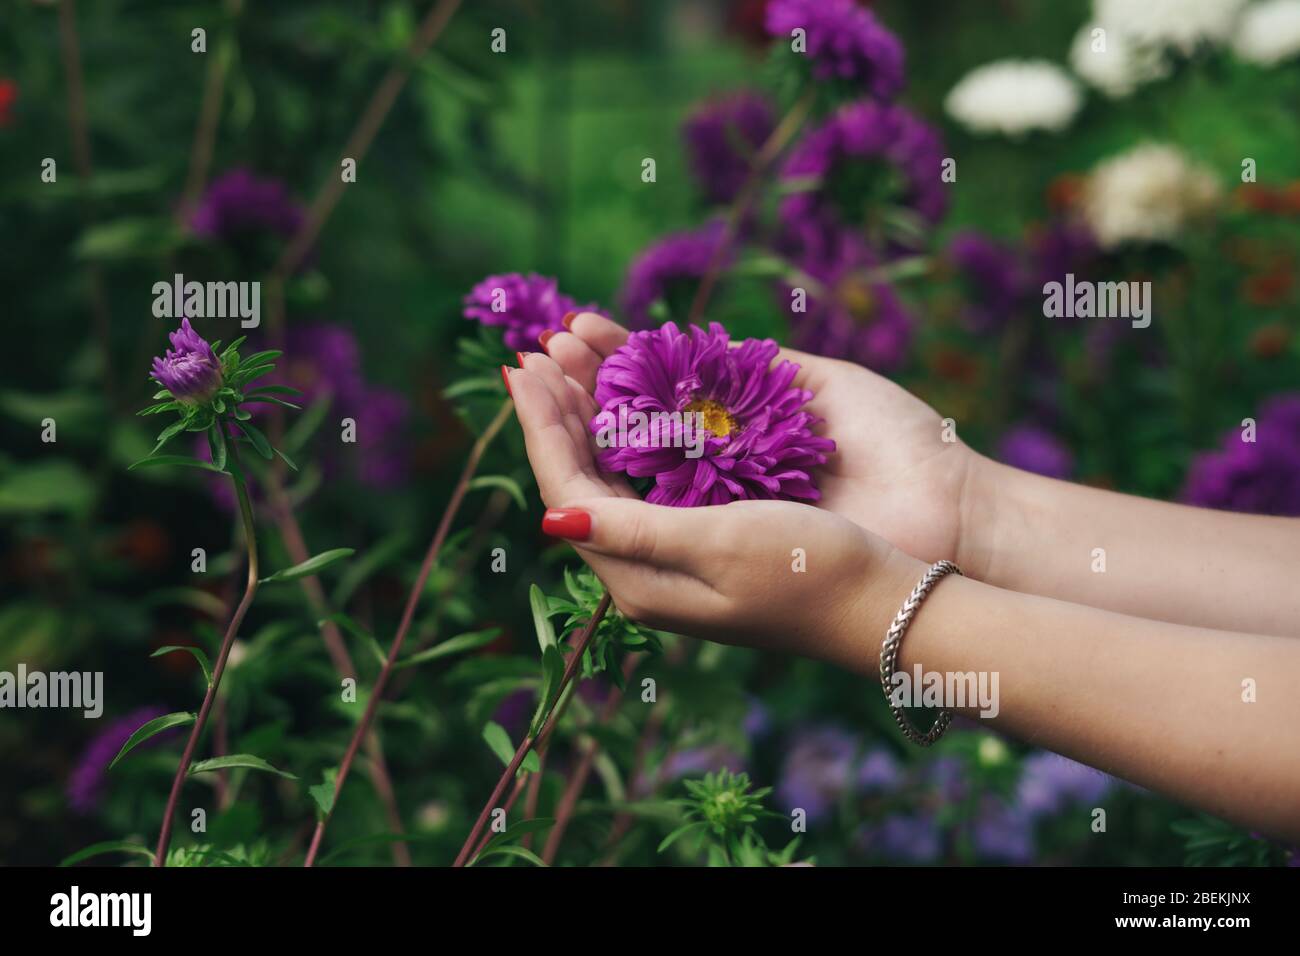 Female hands holding a purple flower. Purple aster Stock Photo